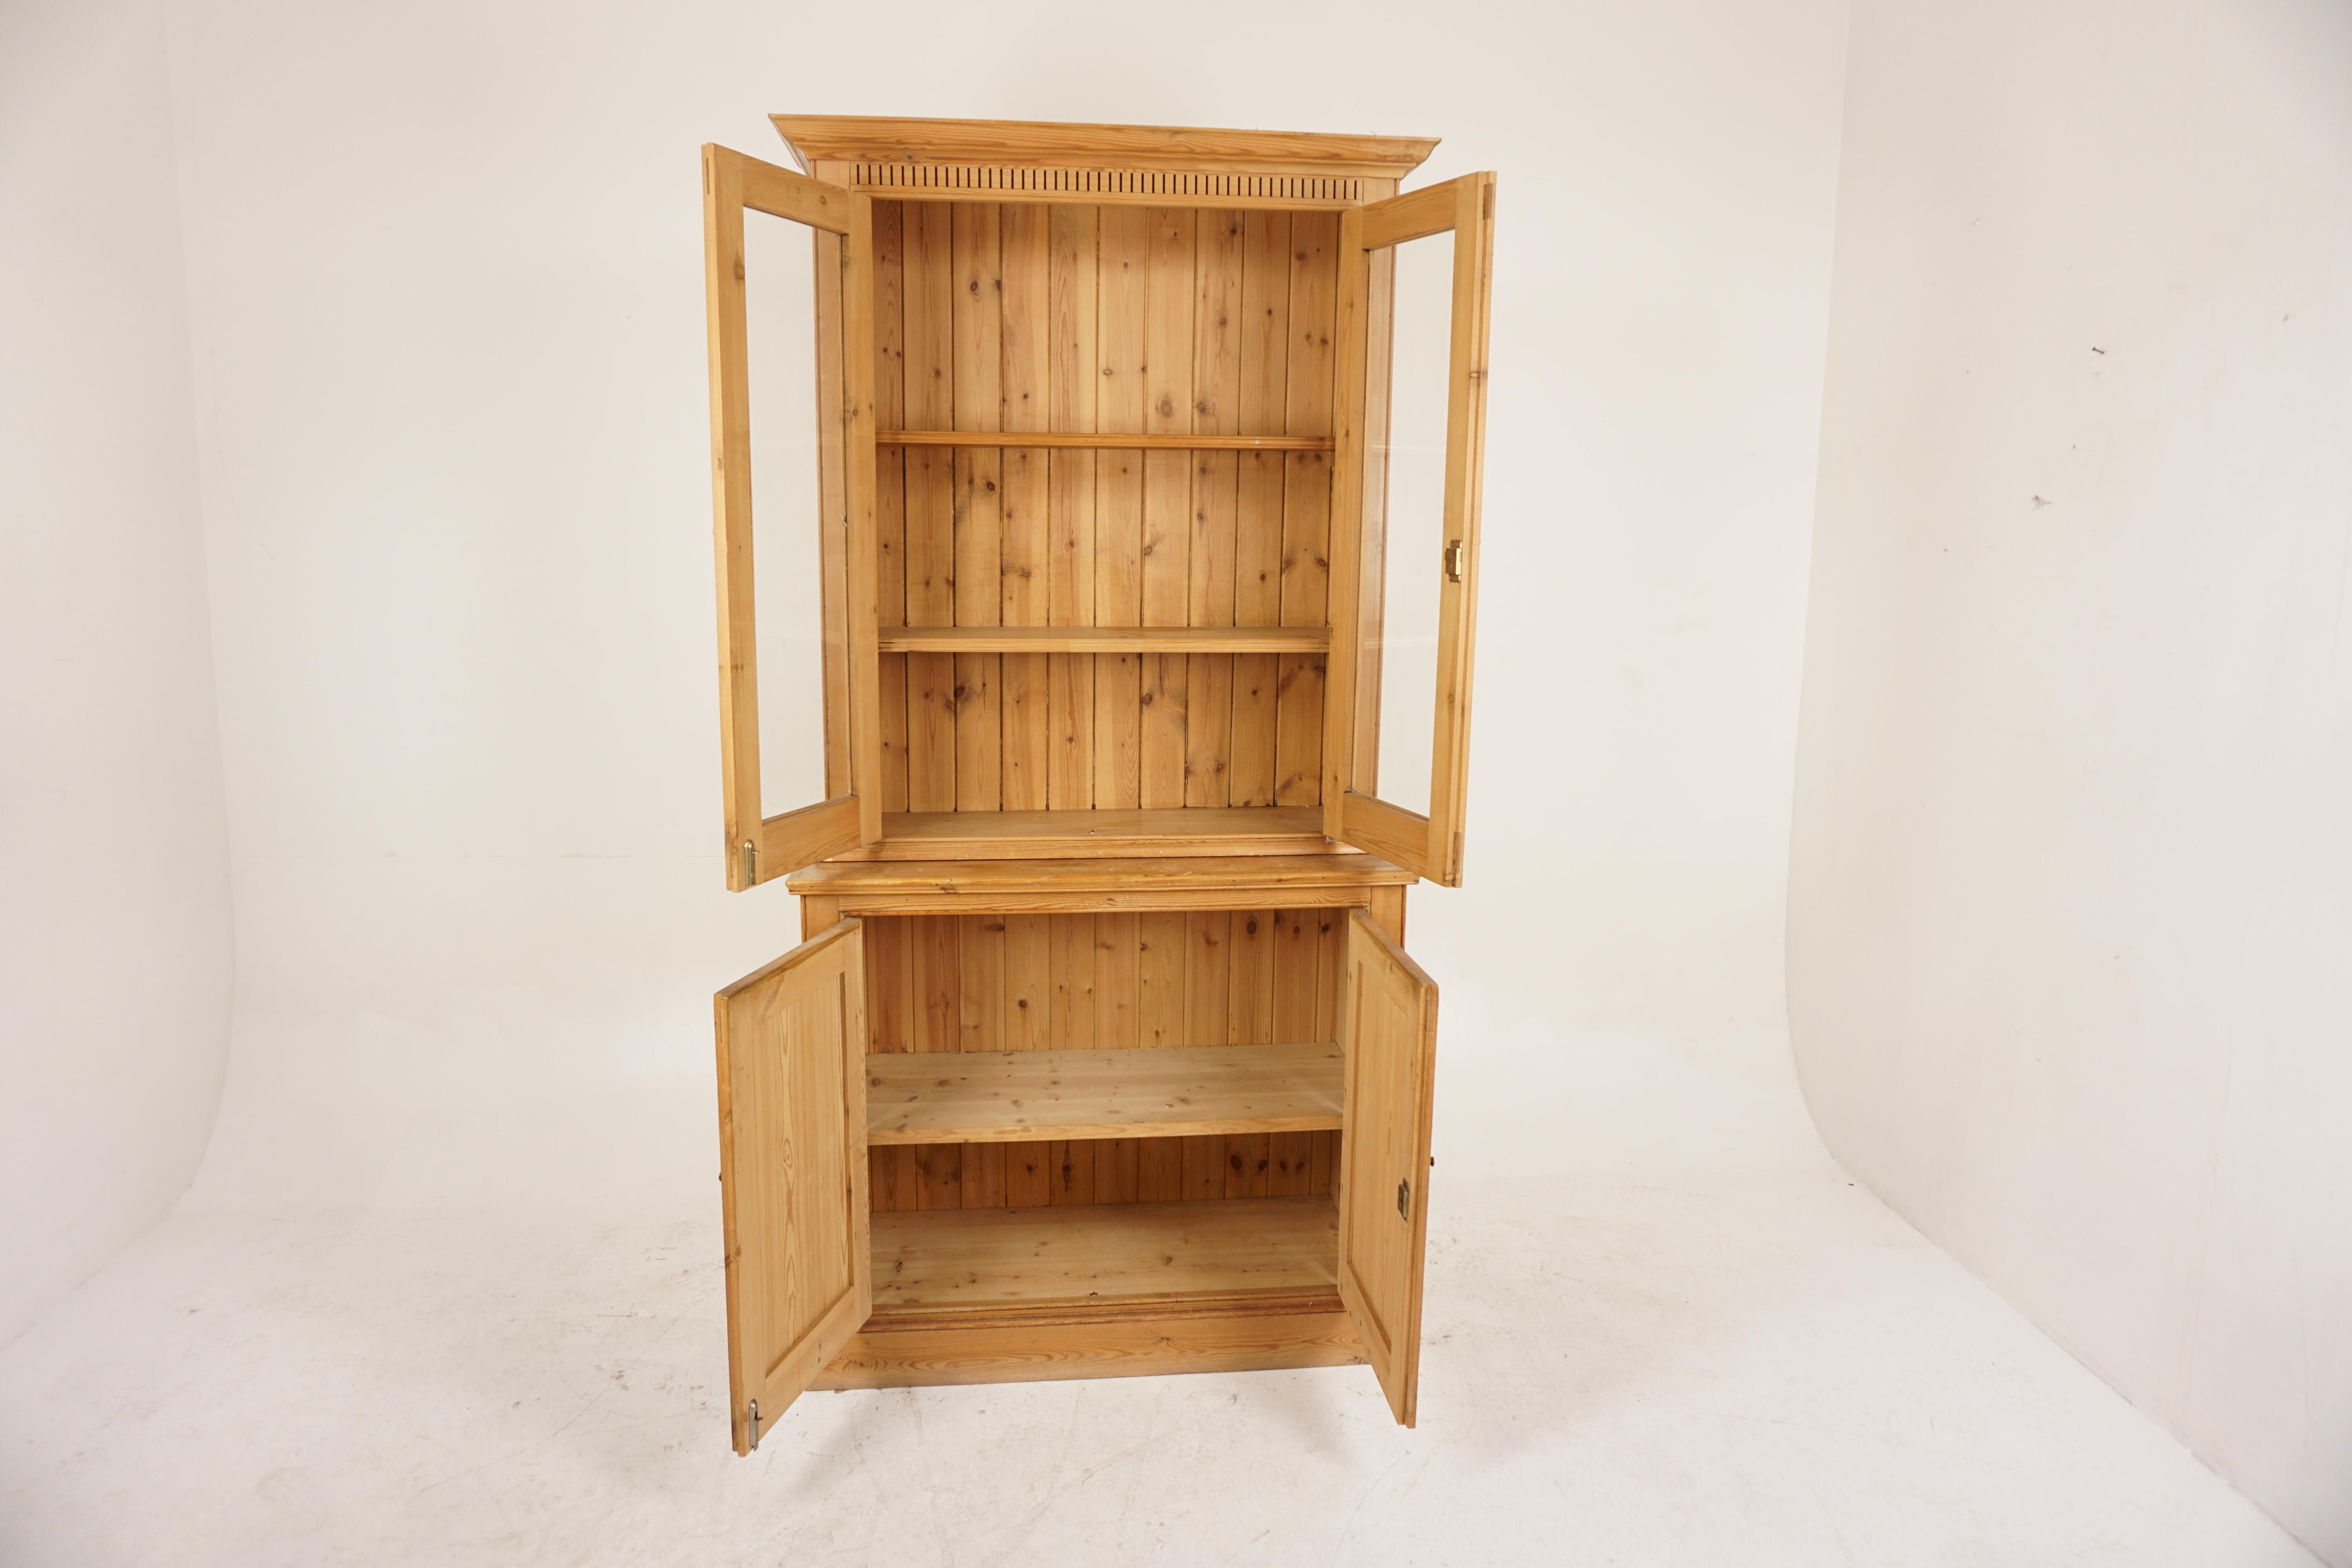 Hand-Crafted Antique Pine Cabinet, 2 Part Farmhouse Display Cabinet, Scotland 1930, H1080